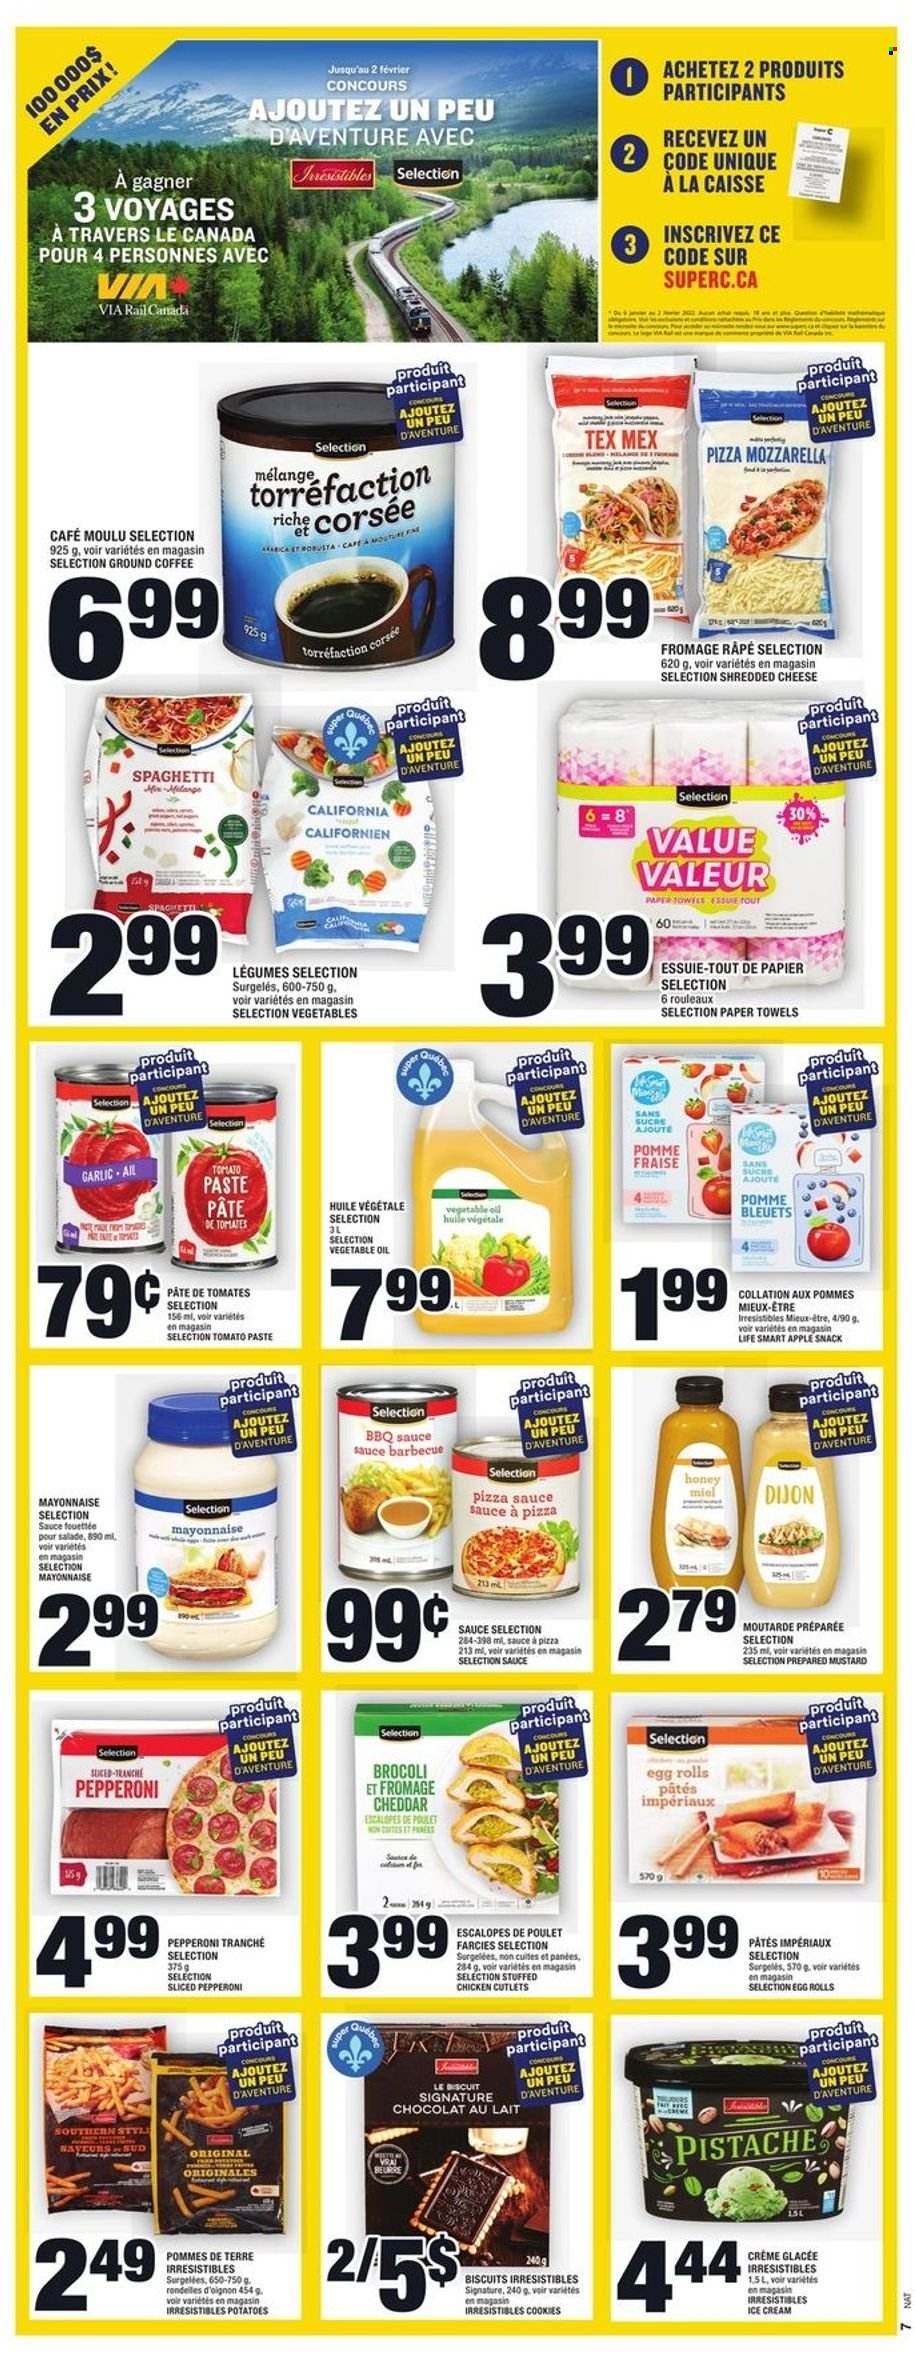 thumbnail - Super C Flyer - January 13, 2022 - January 19, 2022 - Sales products - garlic, potatoes, spaghetti, sauce, egg rolls, stuffed chicken, pepperoni, shredded cheese, cheddar, mayonnaise, ice cream, cookies, snack, biscuit, tomato paste, BBQ sauce, mustard, vegetable oil, oil, honey, coffee, ground coffee, chicken breasts, chicken cutlets, chicken, kitchen towels, paper towels. Page 8.